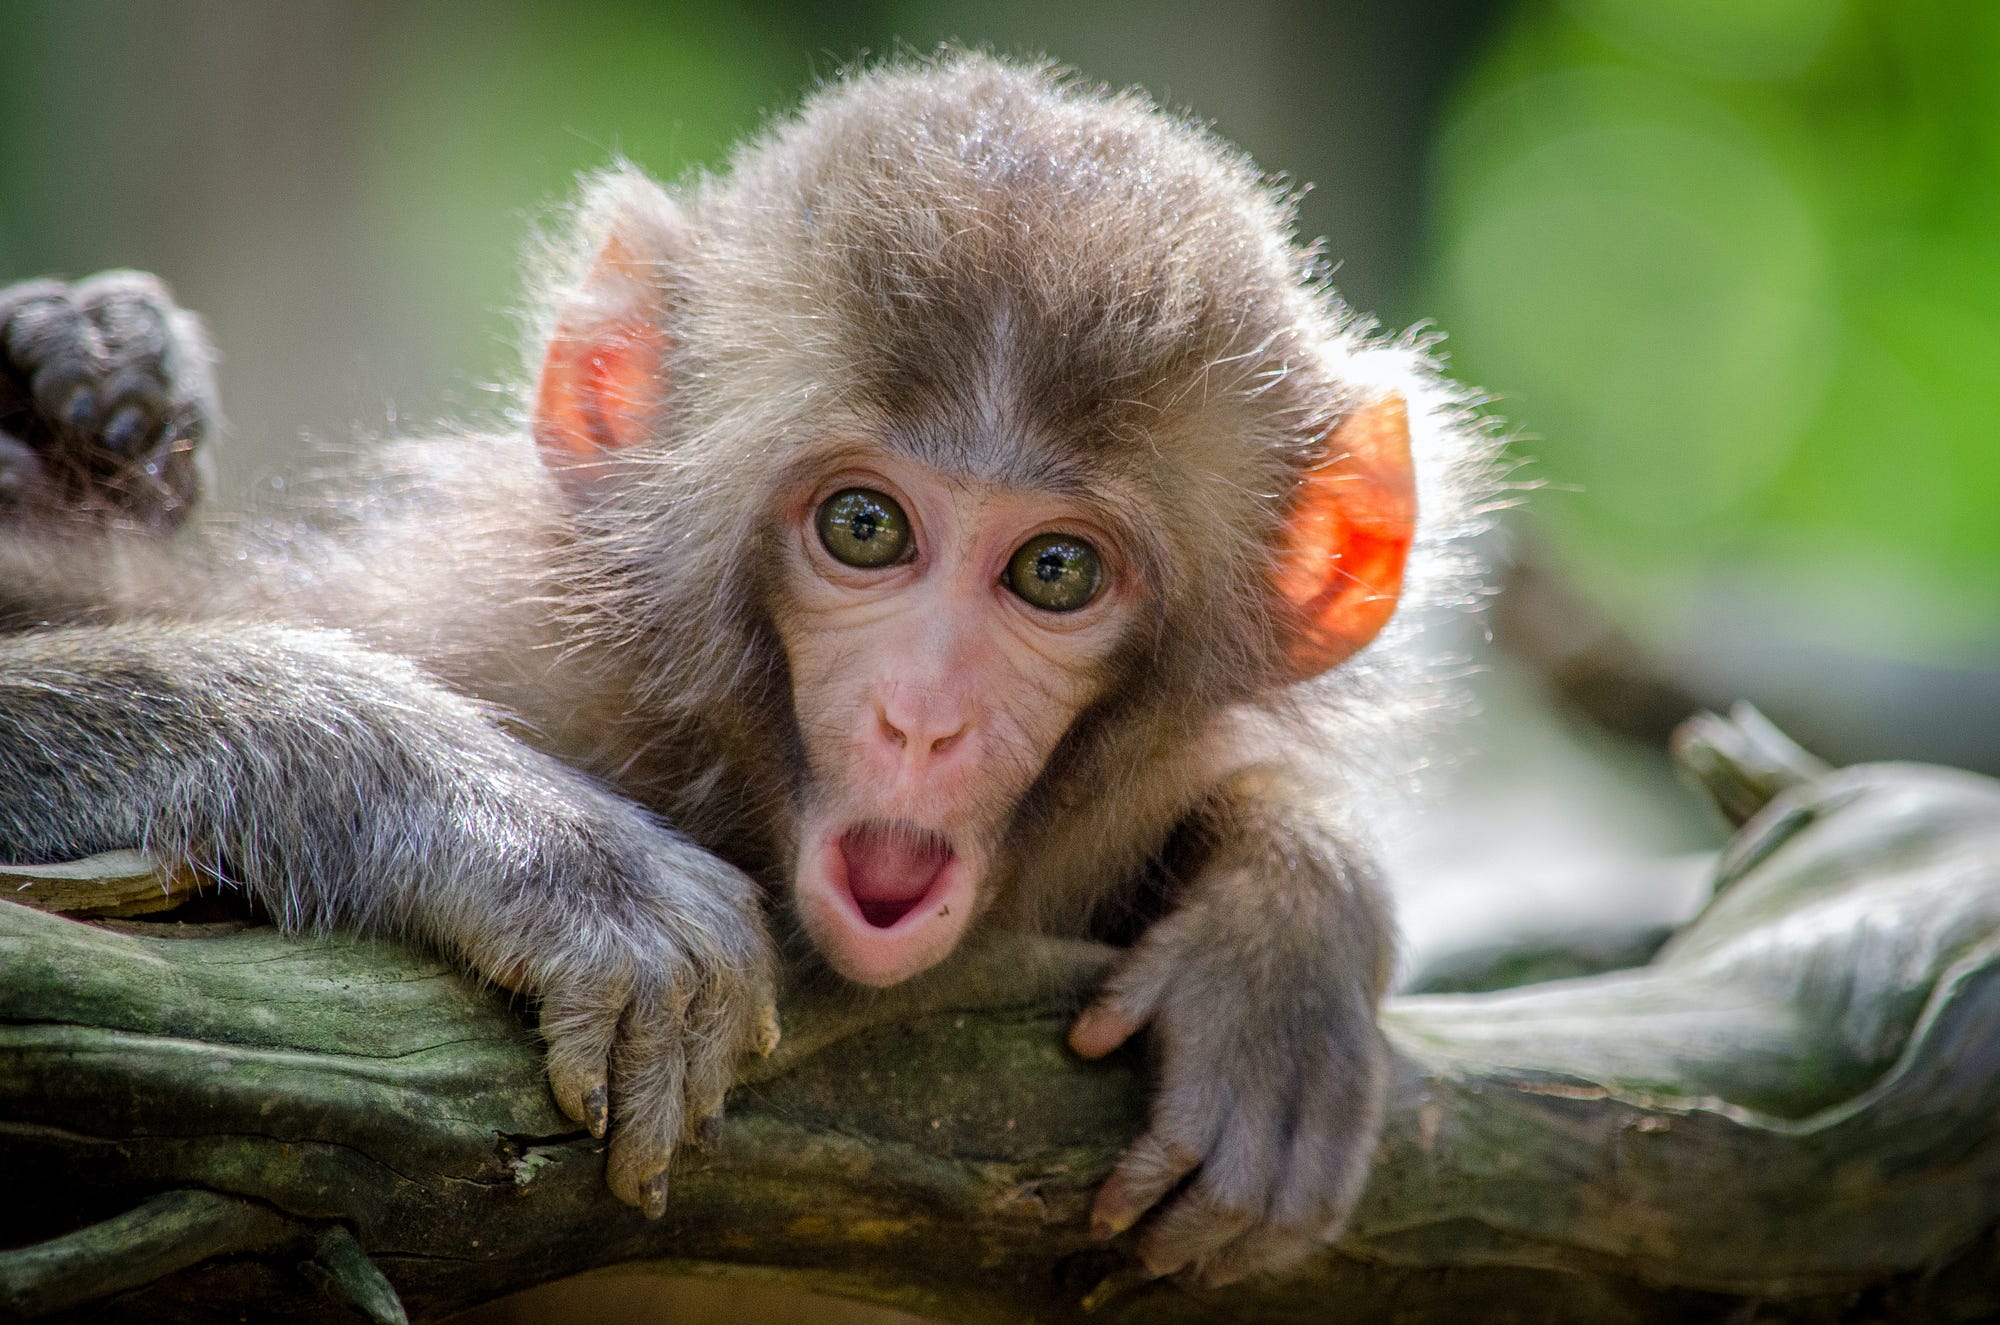 Chinese scientists create monkeys with autism gene